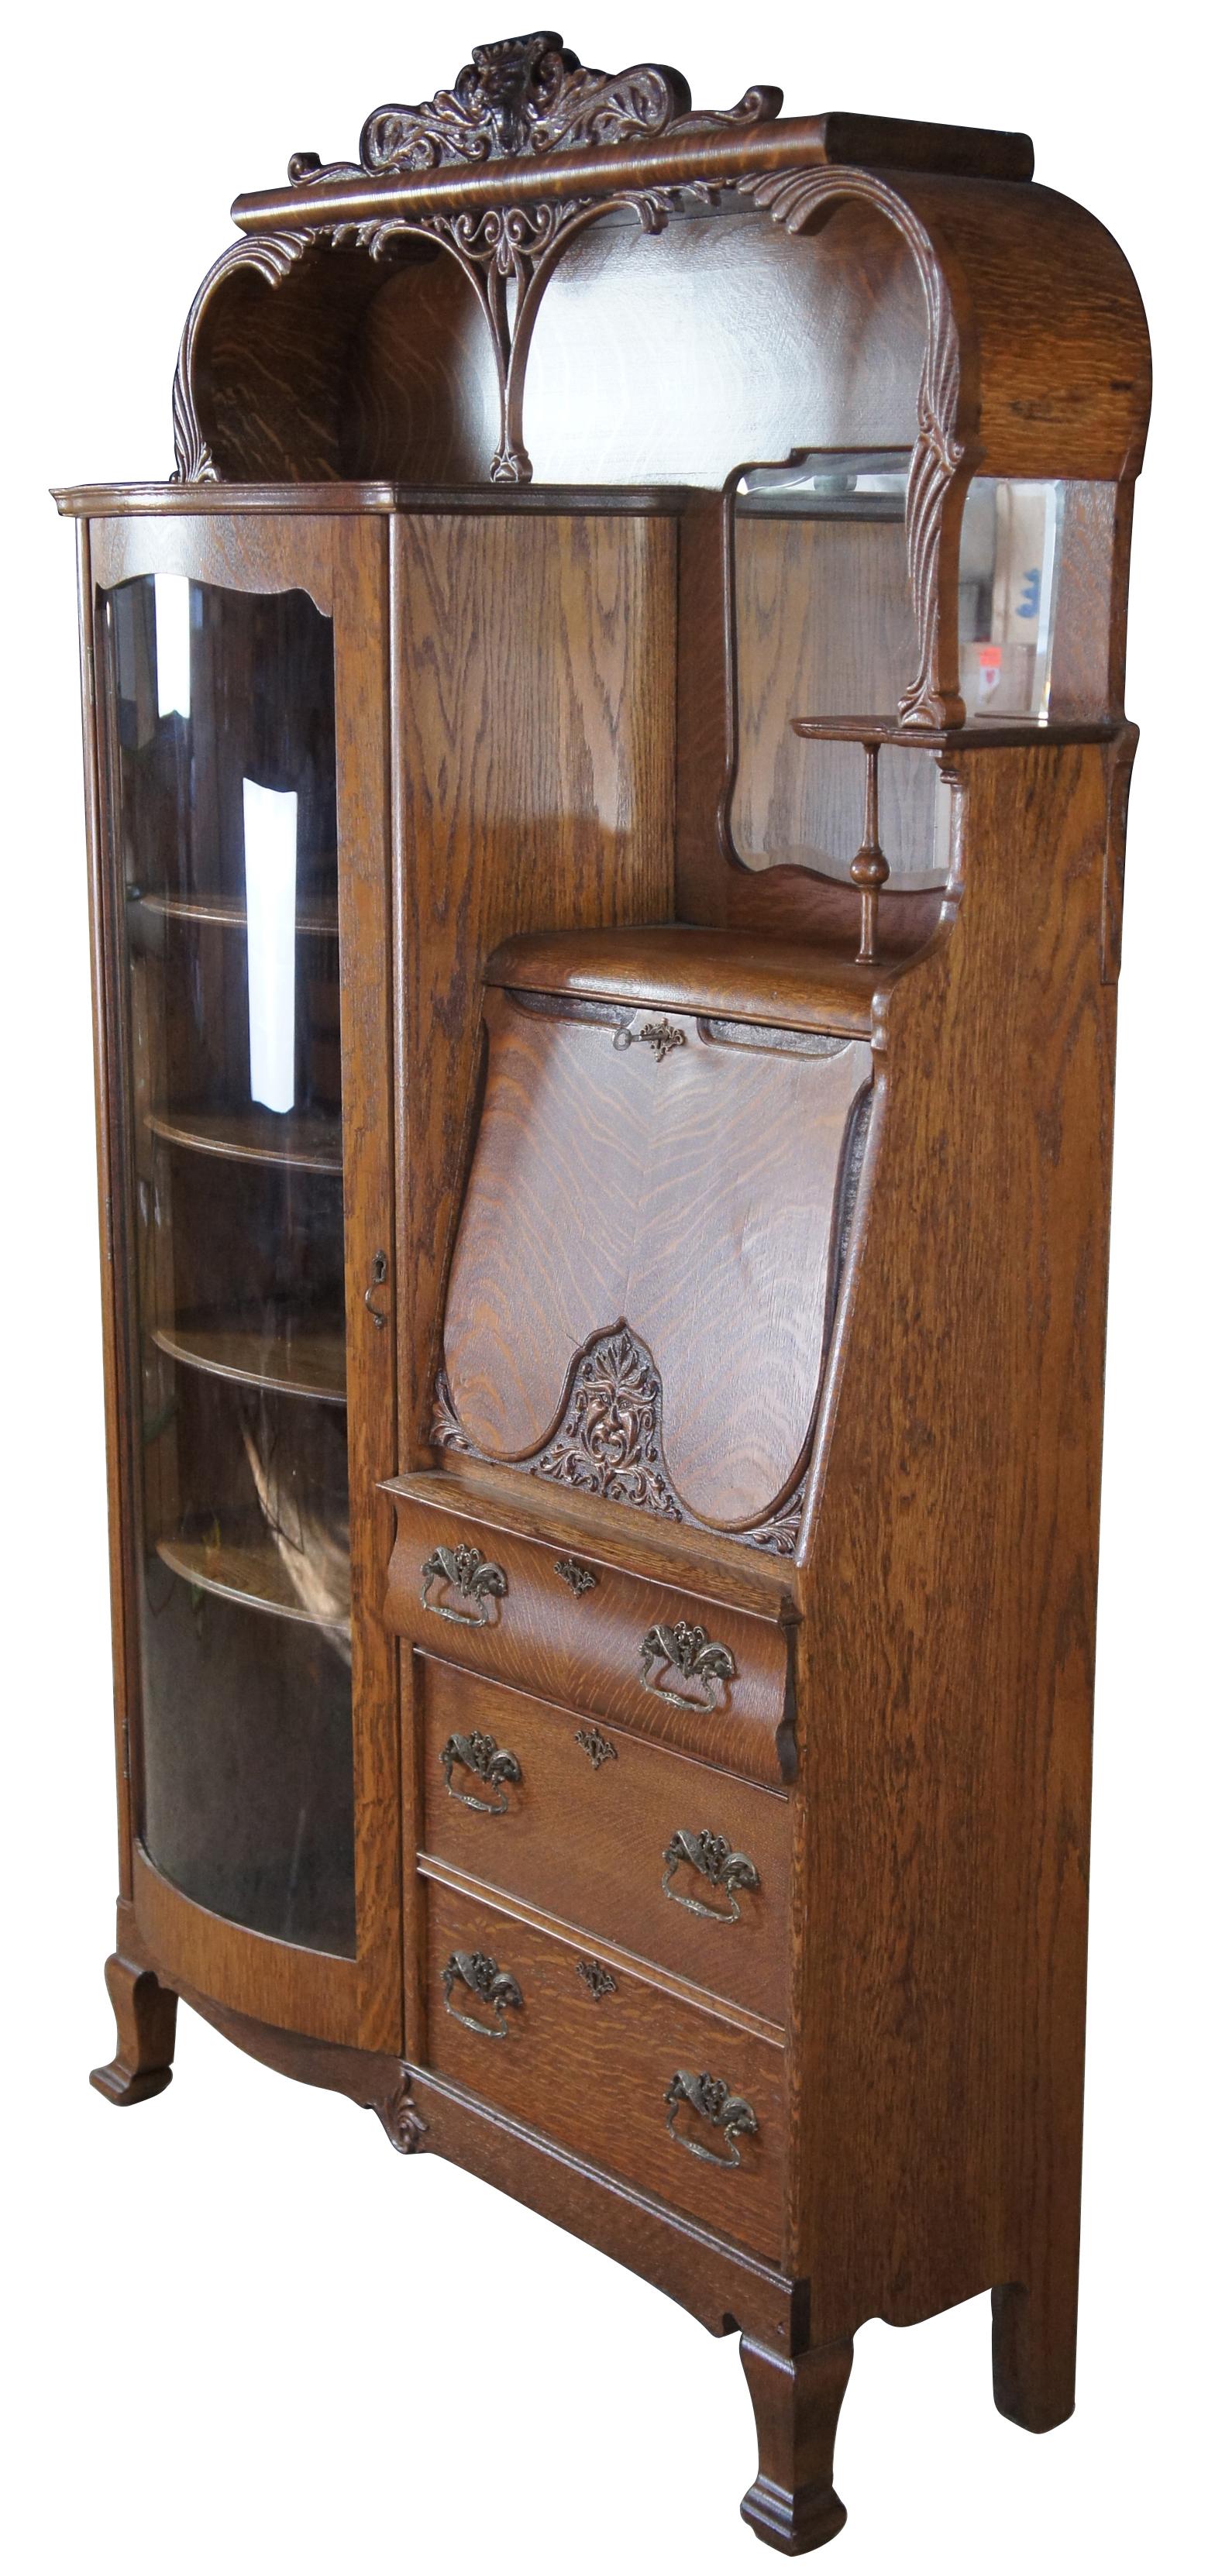 Monumental antique Victorian side by side secretary desk and curio bookcase, circa 1900s. Made of quartersawn or 